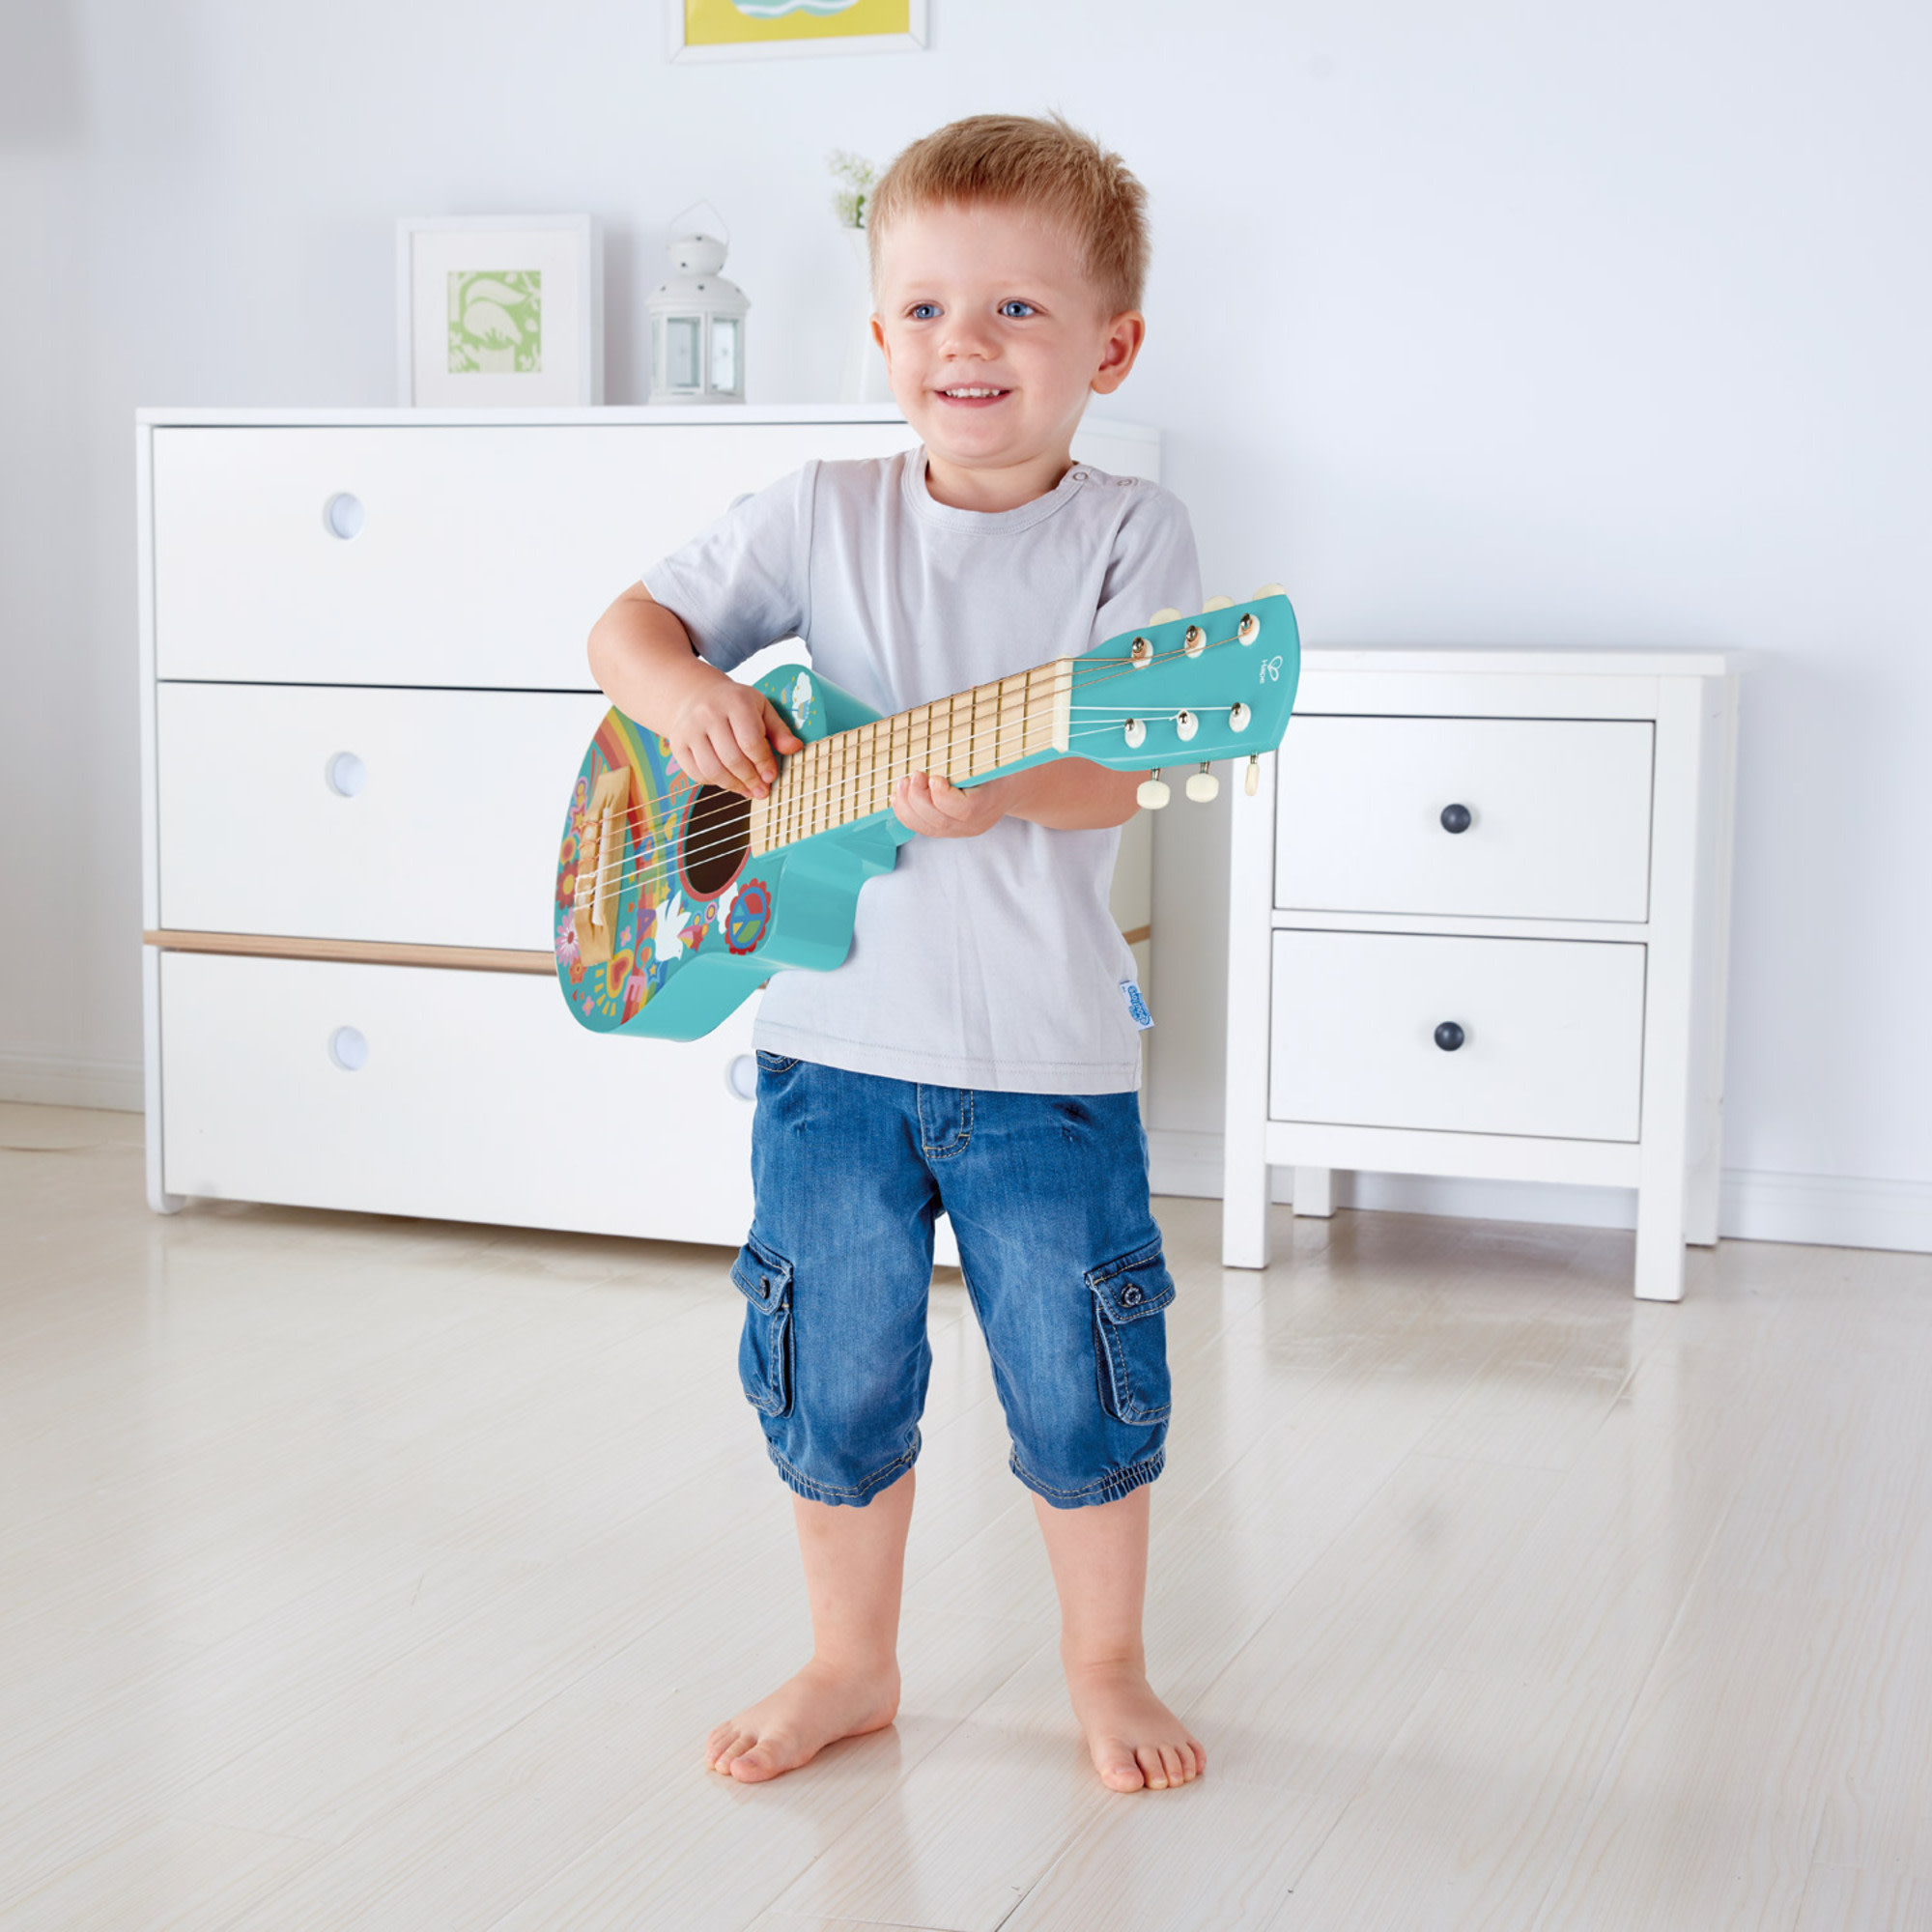 Hape First Flower Power 26" Musical Guitar in Turquoise for Preschool & Toddler - image 5 of 6